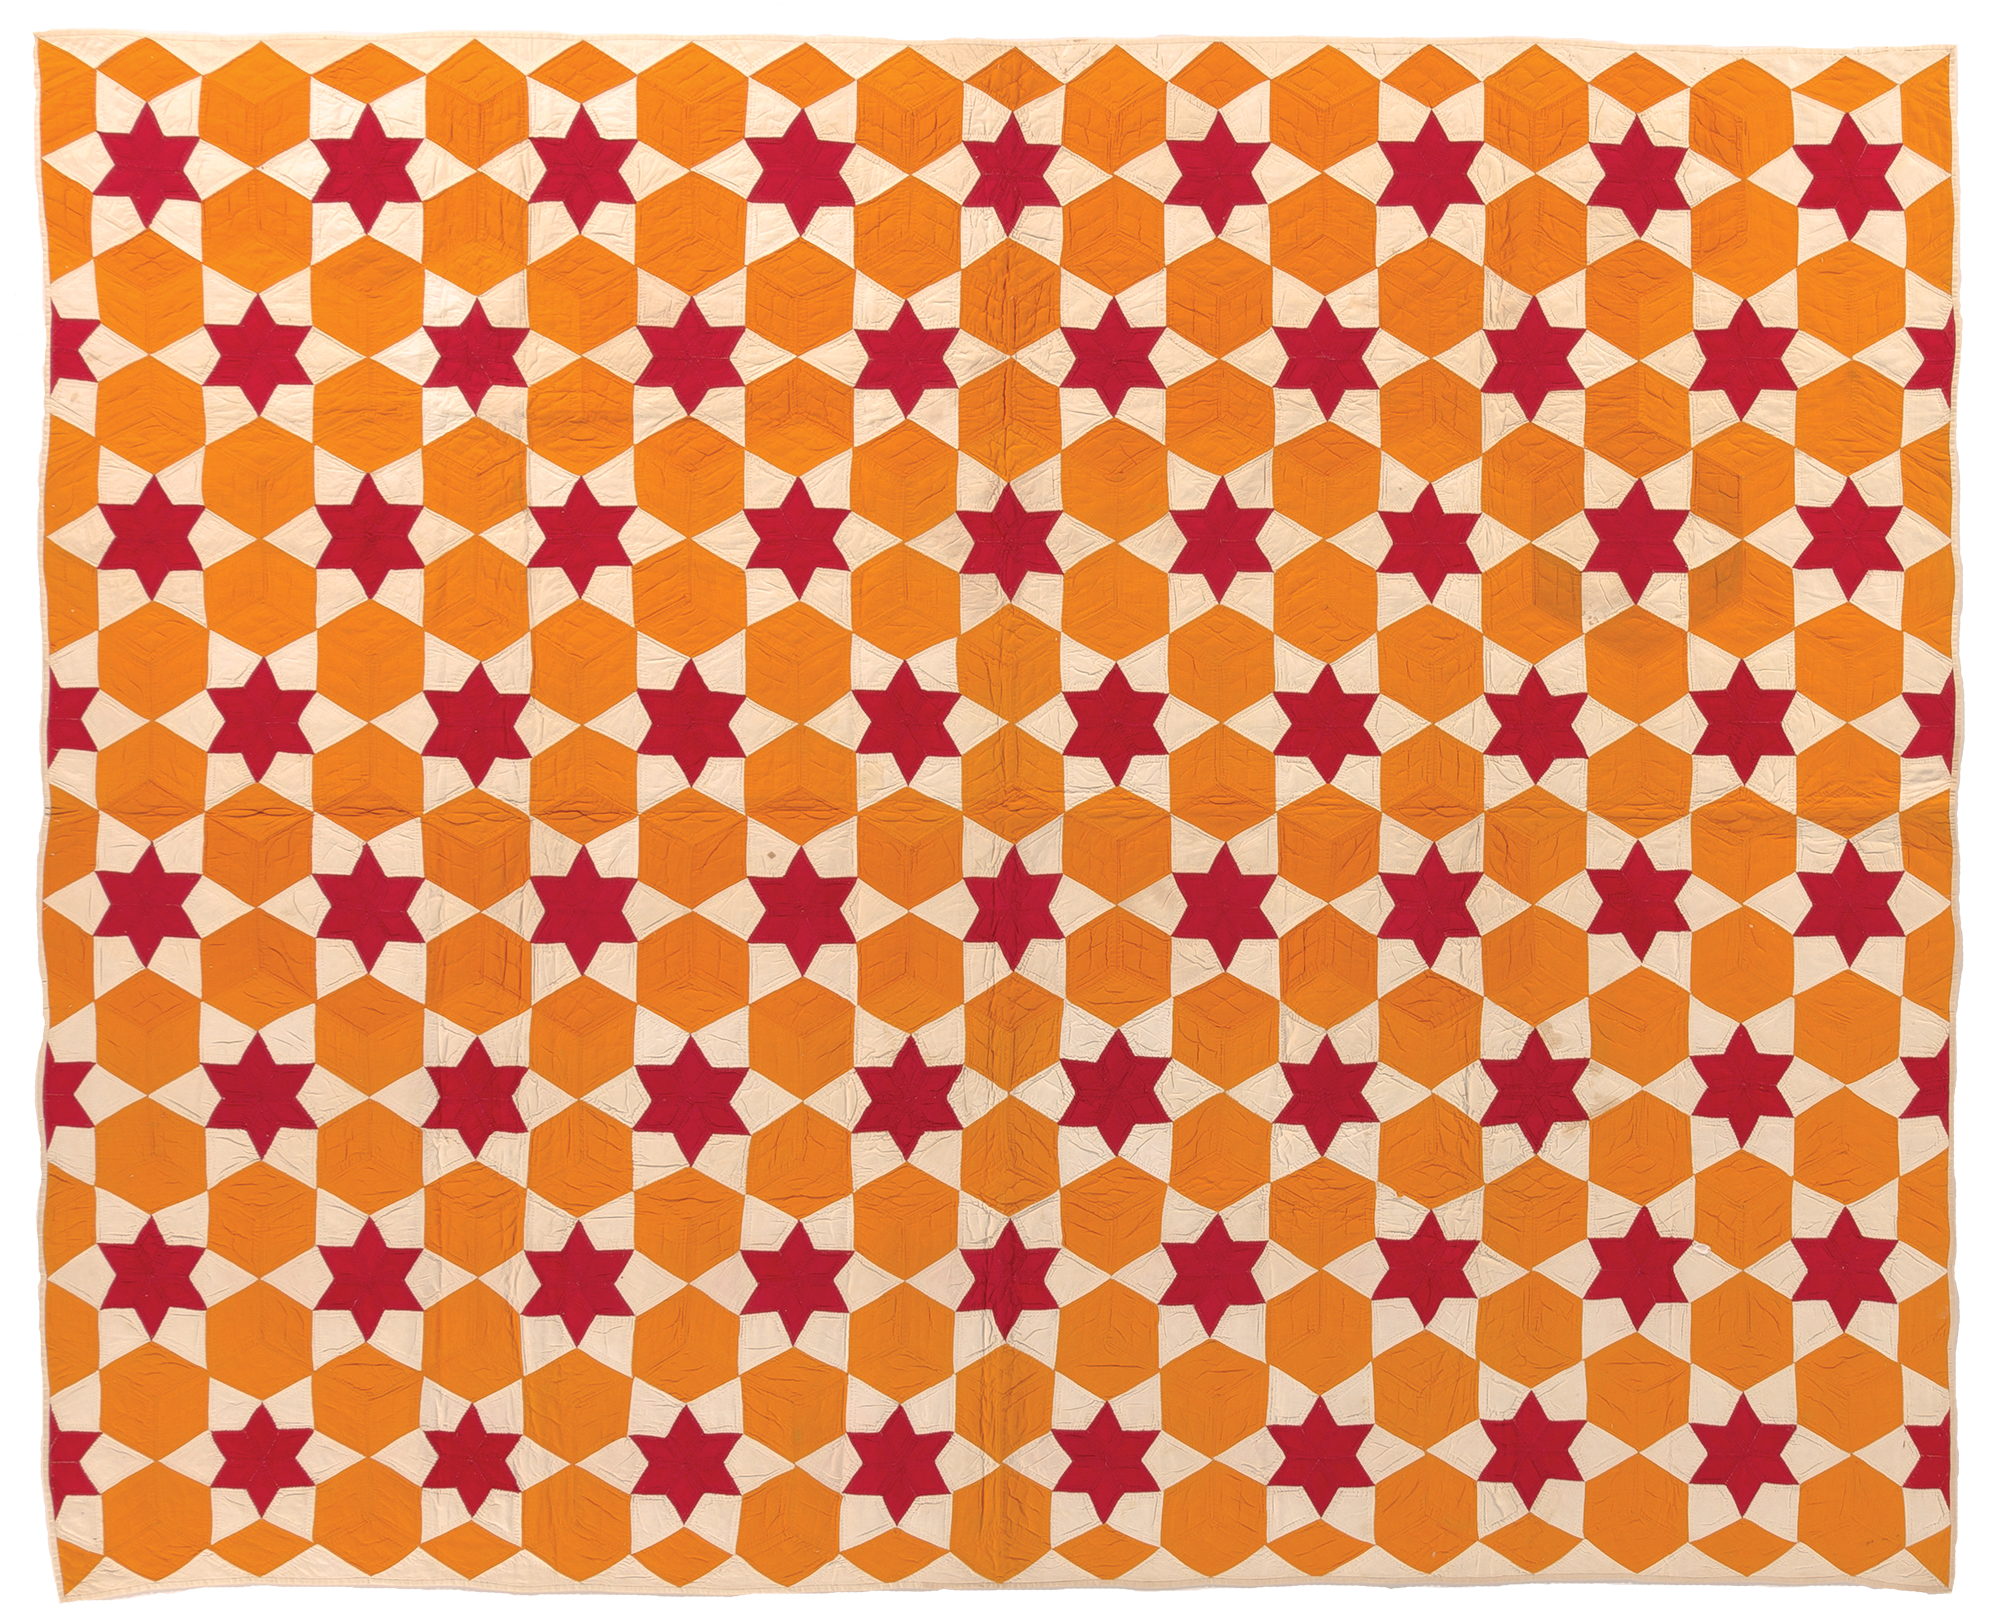 This "Star and Tumbling Block" quilt, probably made in Pennsylvania circa 1880-1900, appears in "Cheddar Quilts from the Joanna S. Rose Collection," on display at the International Quilt Study Center & Museum.